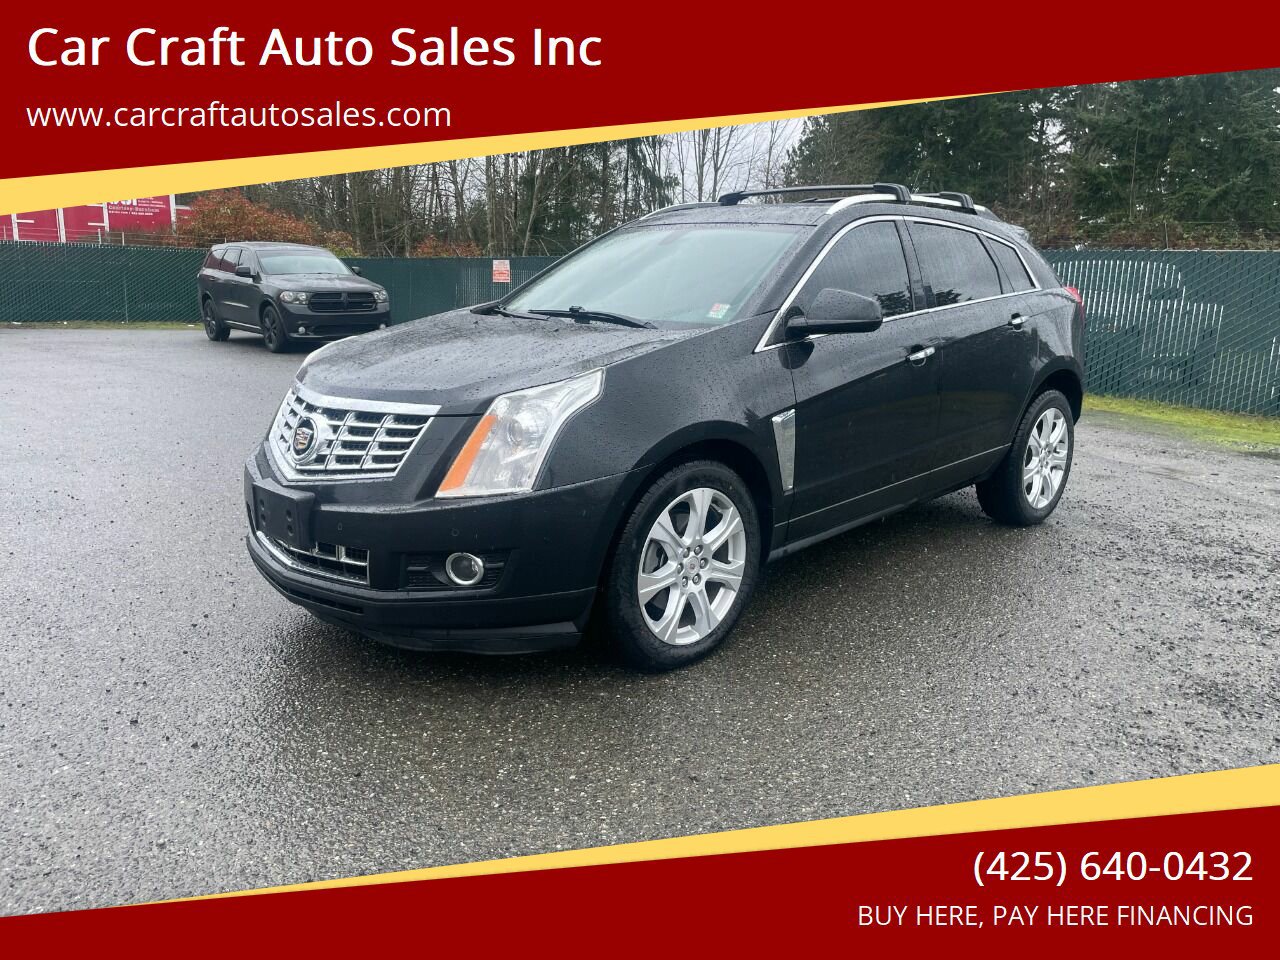 Used 2013 Cadillac SRX for Sale Right Now - Autotrader